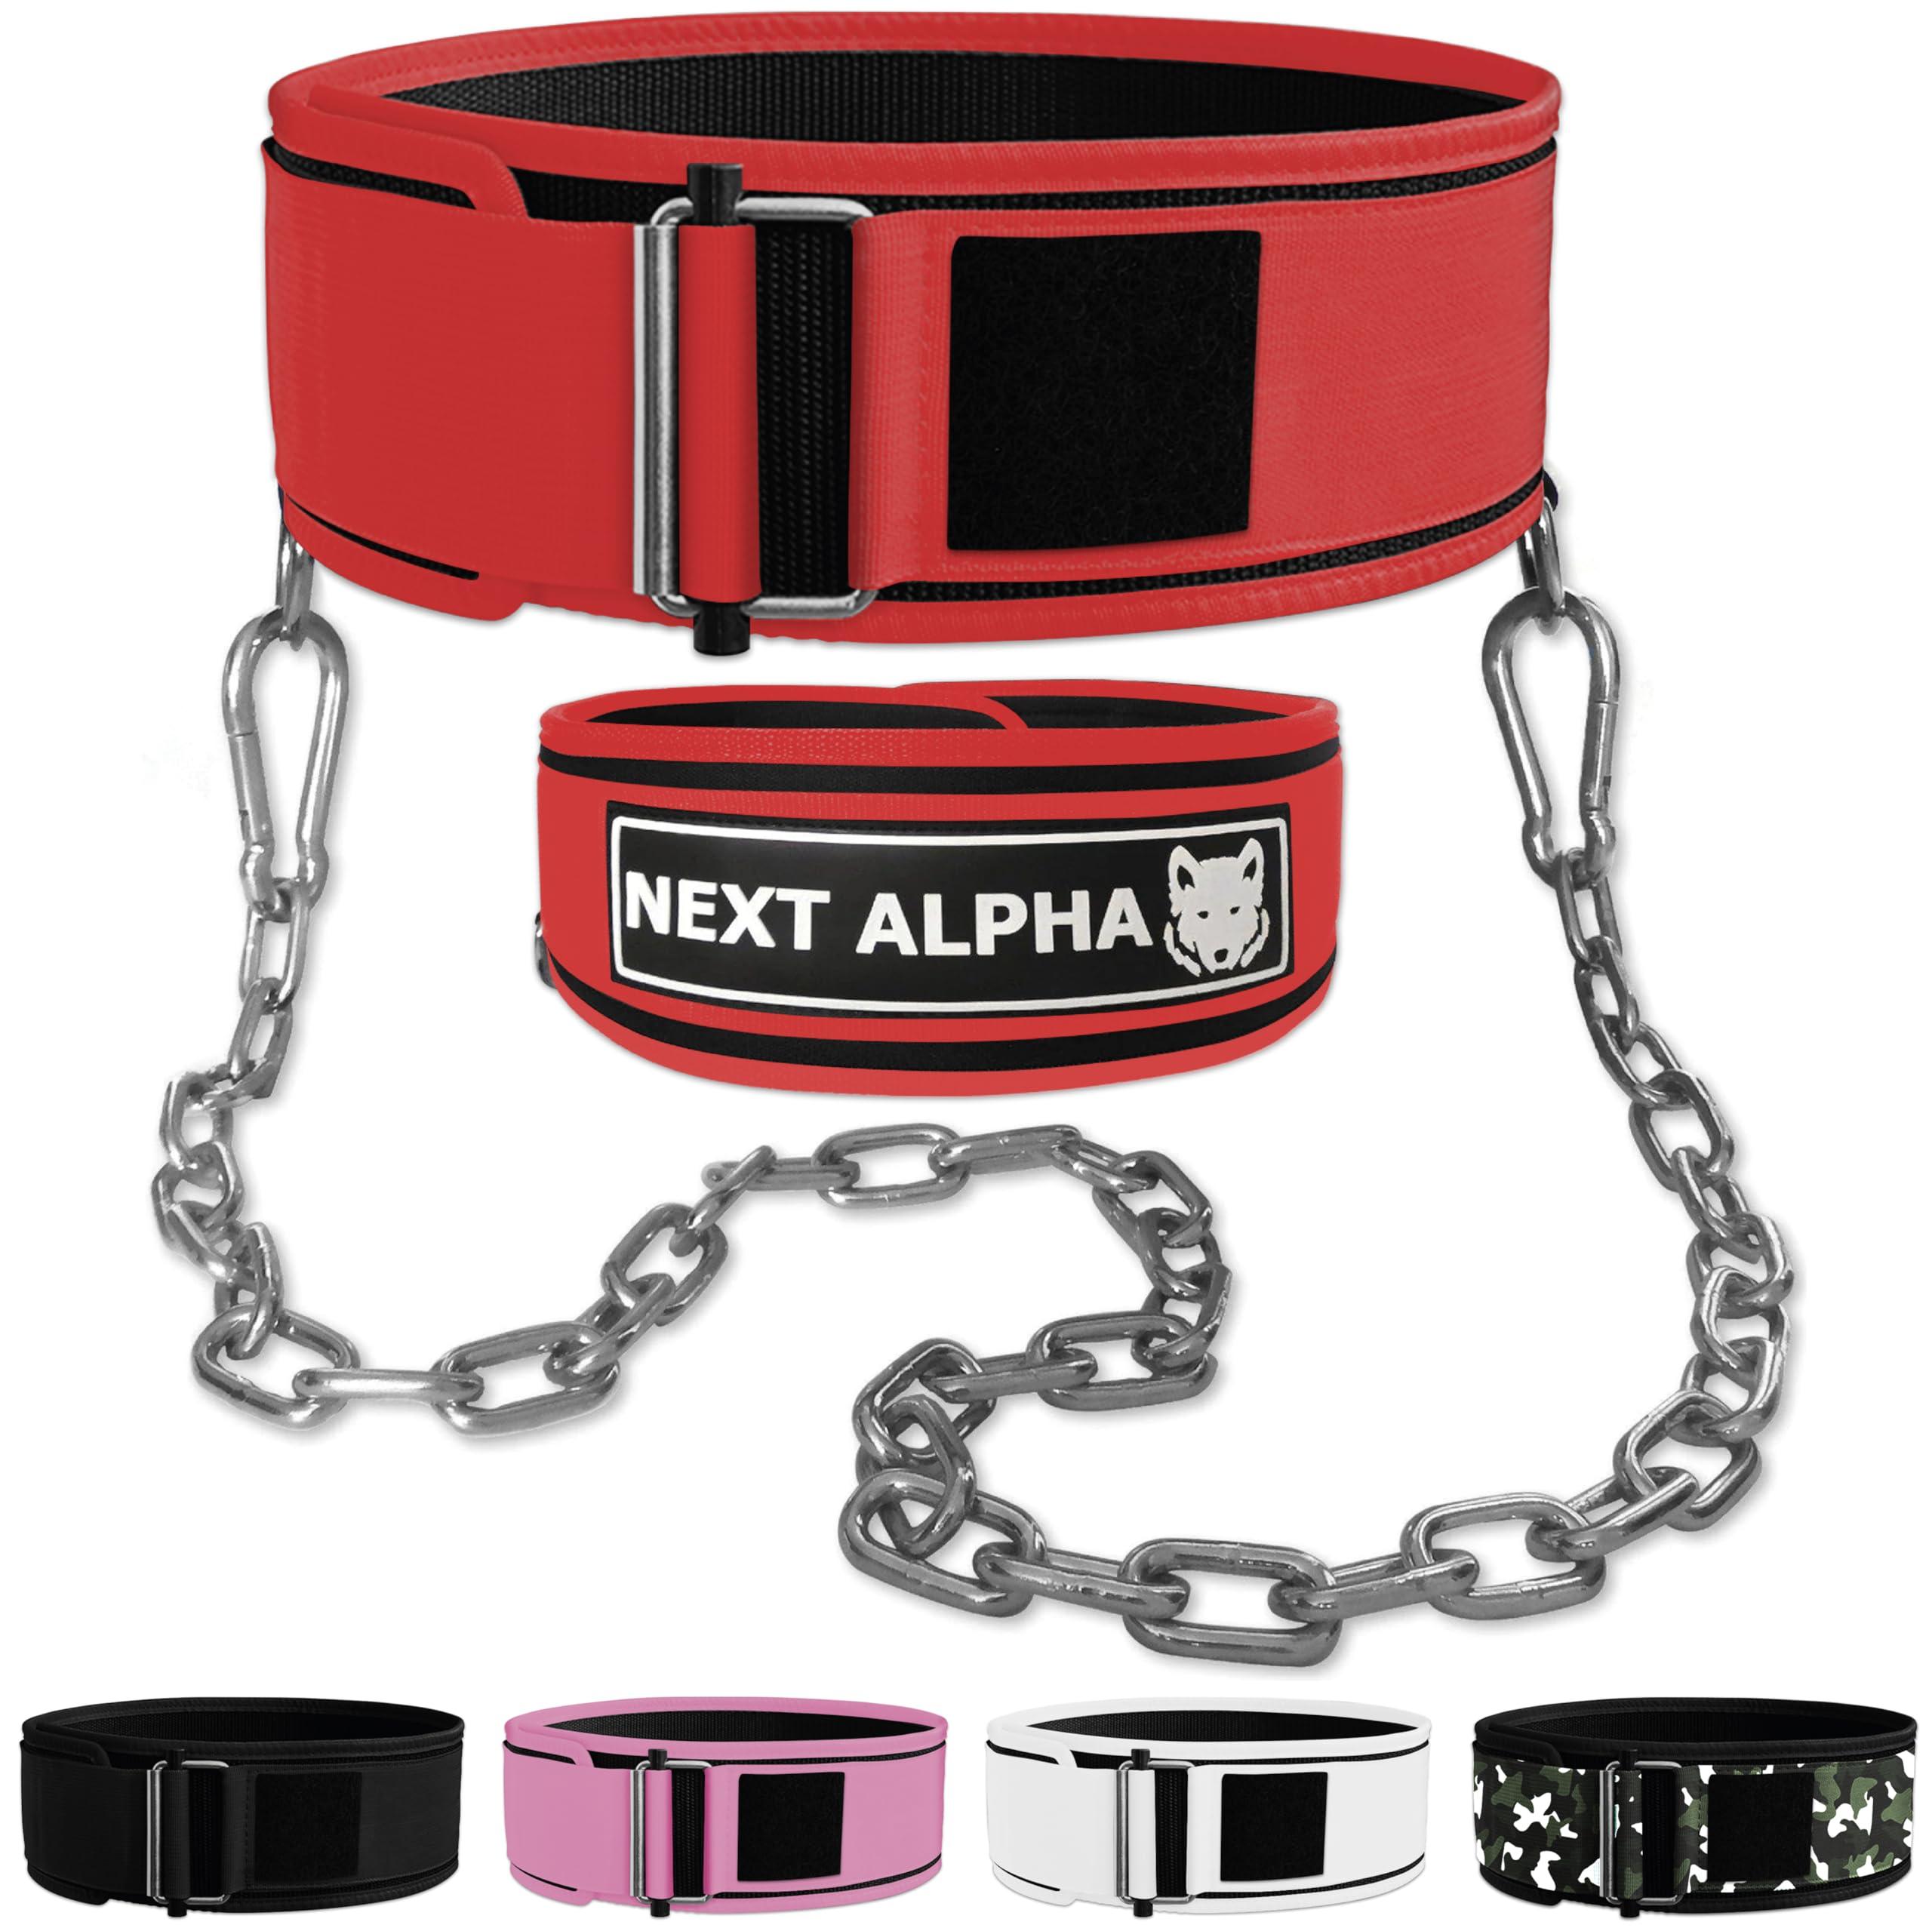 Next Alpha Weightlifting Belt & Dip Belt Combination - Custom Weight Lifting Belt for Men and Women - Self-Locking & Quick Release Buckle - With Chain - Red - Extra Large